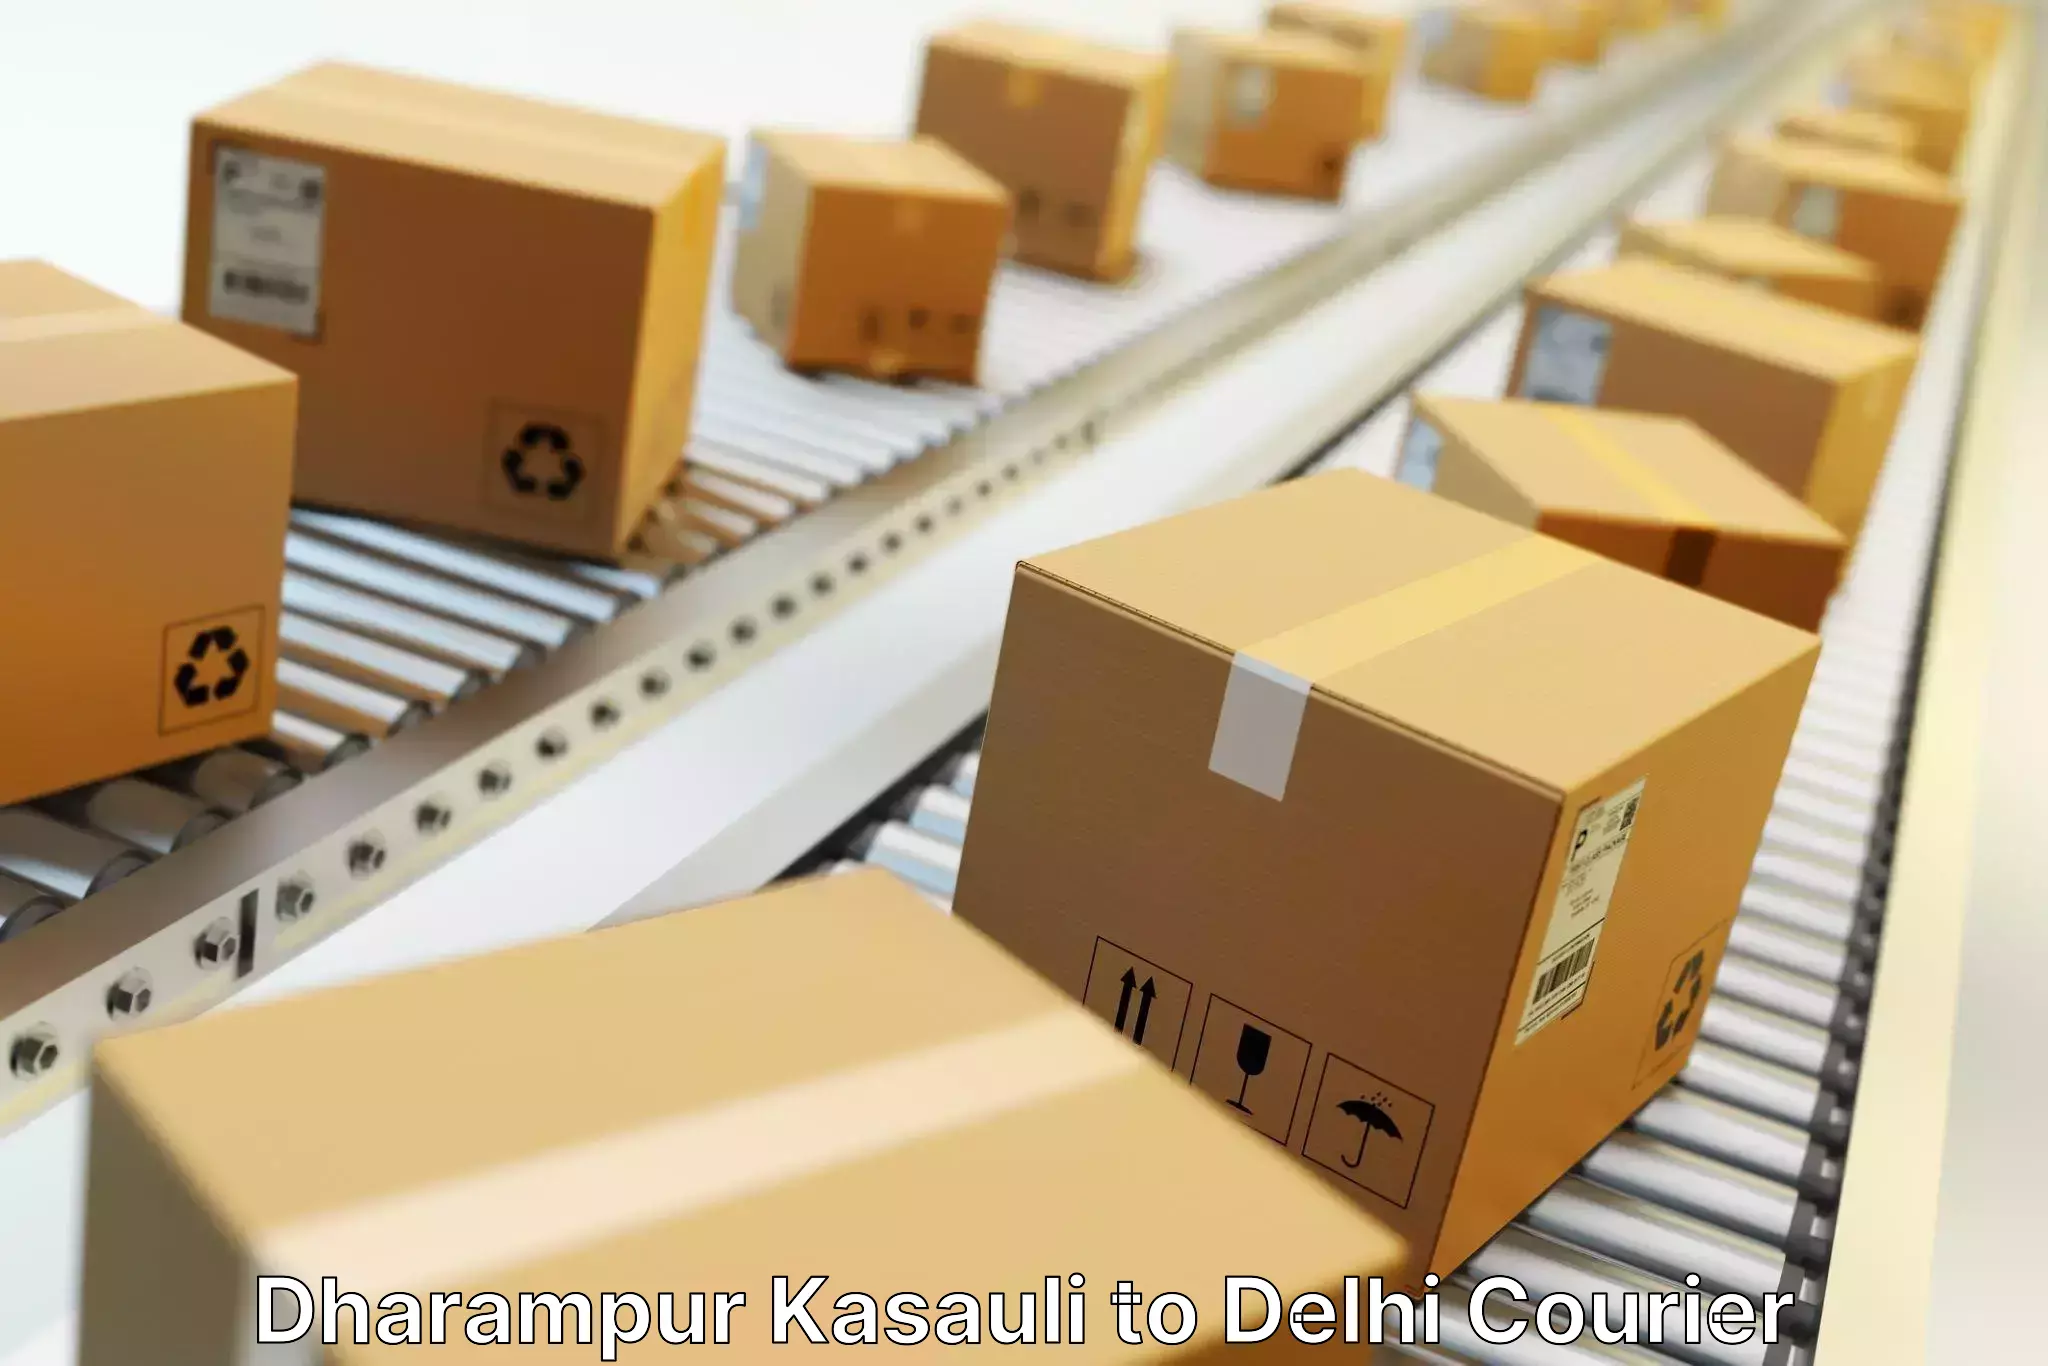 Online package tracking Dharampur Kasauli to University of Delhi